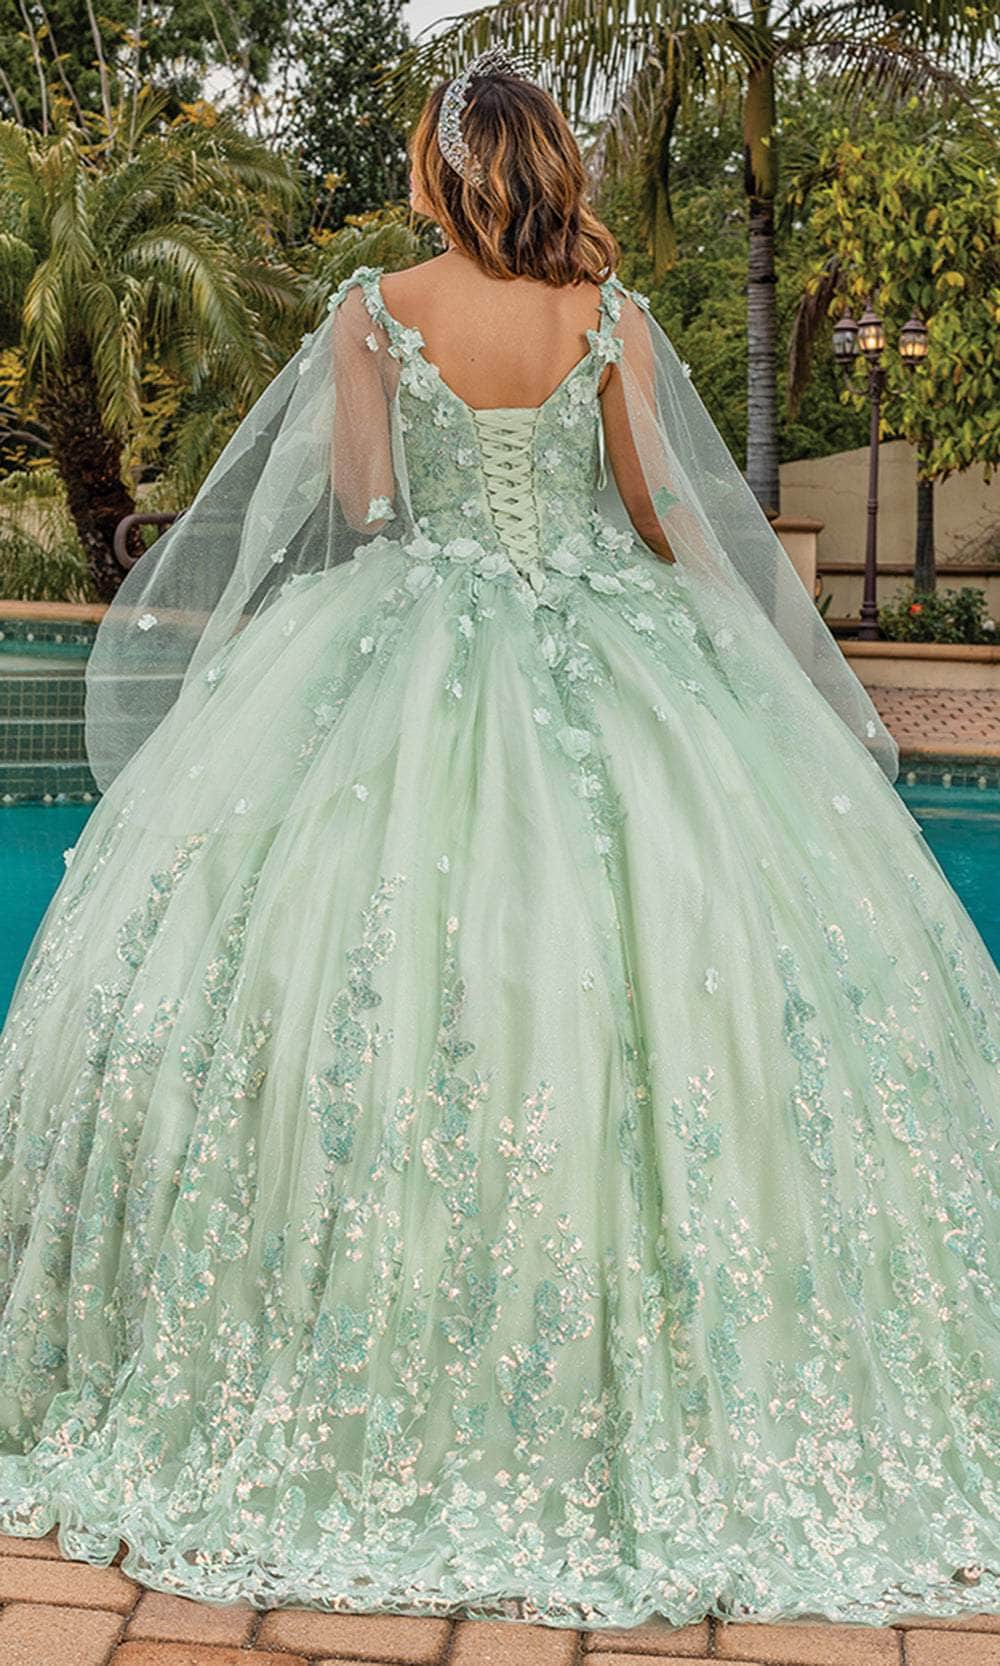 Dancing Queen - 1574 Floral Applique Off Shoulder Ballgown With Train –  Couture Candy